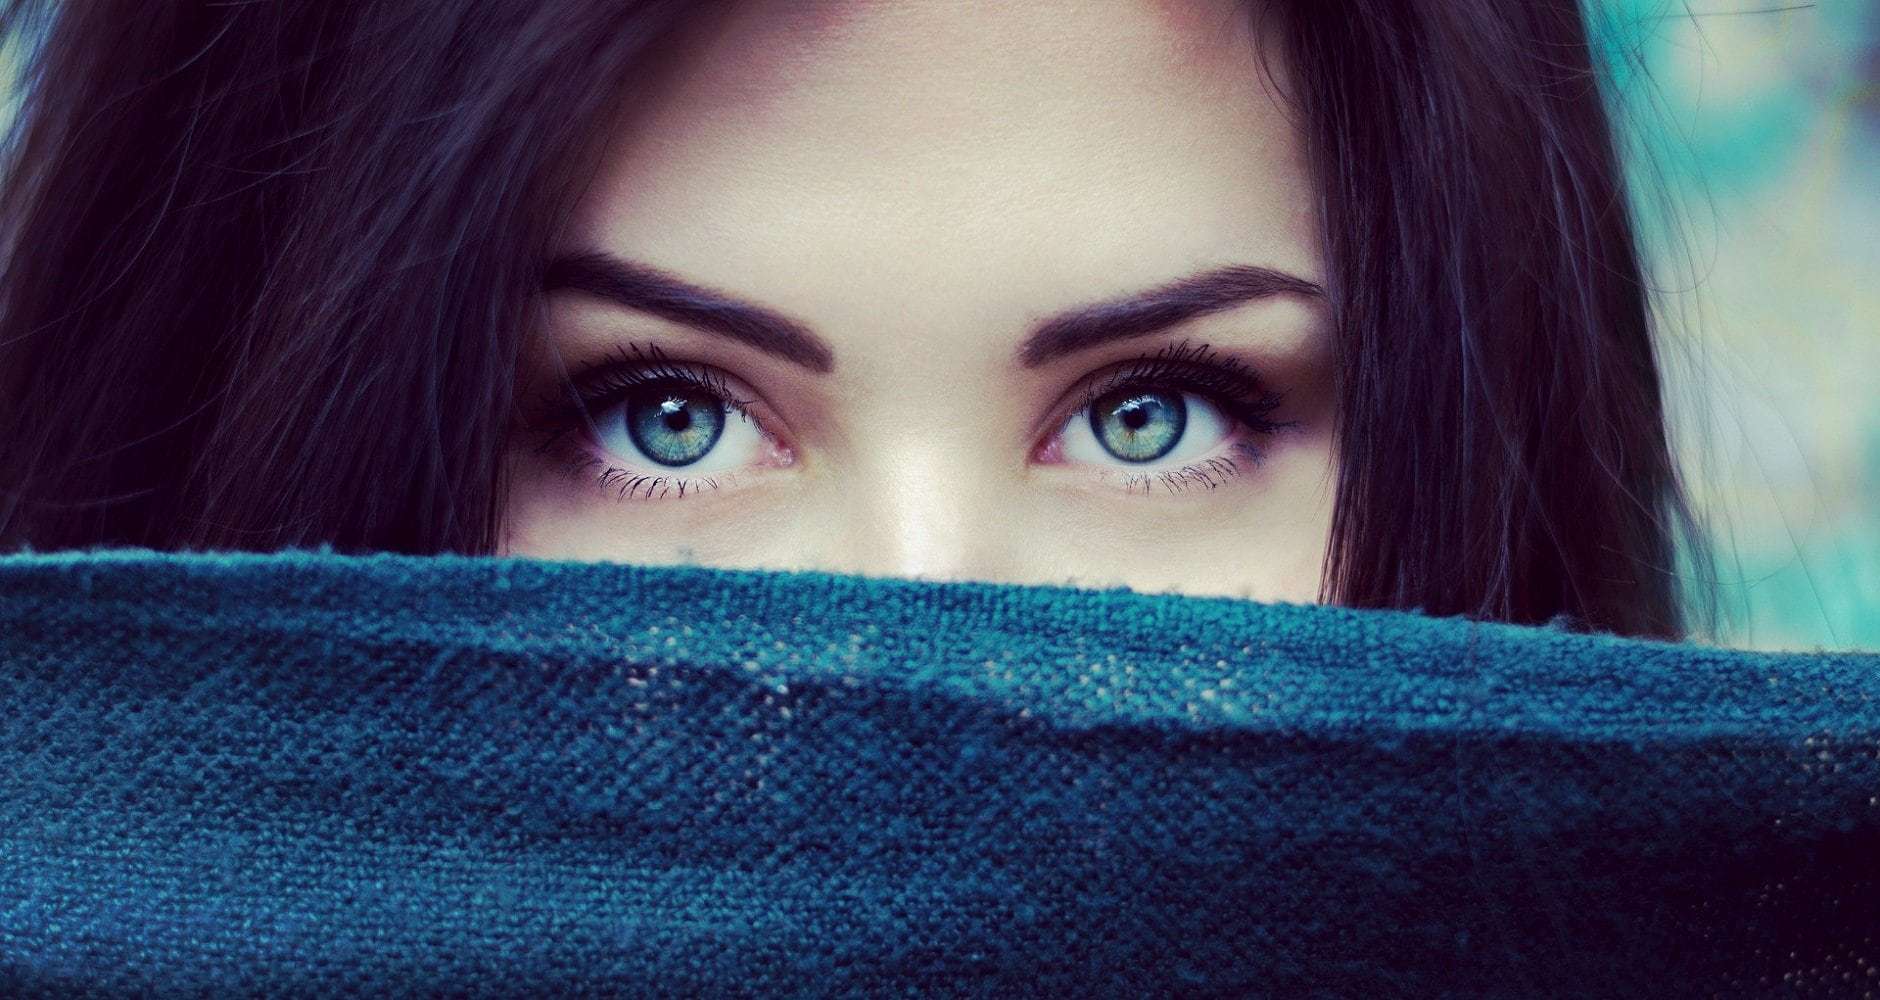 A woman with beautiful eyes looking into the camera